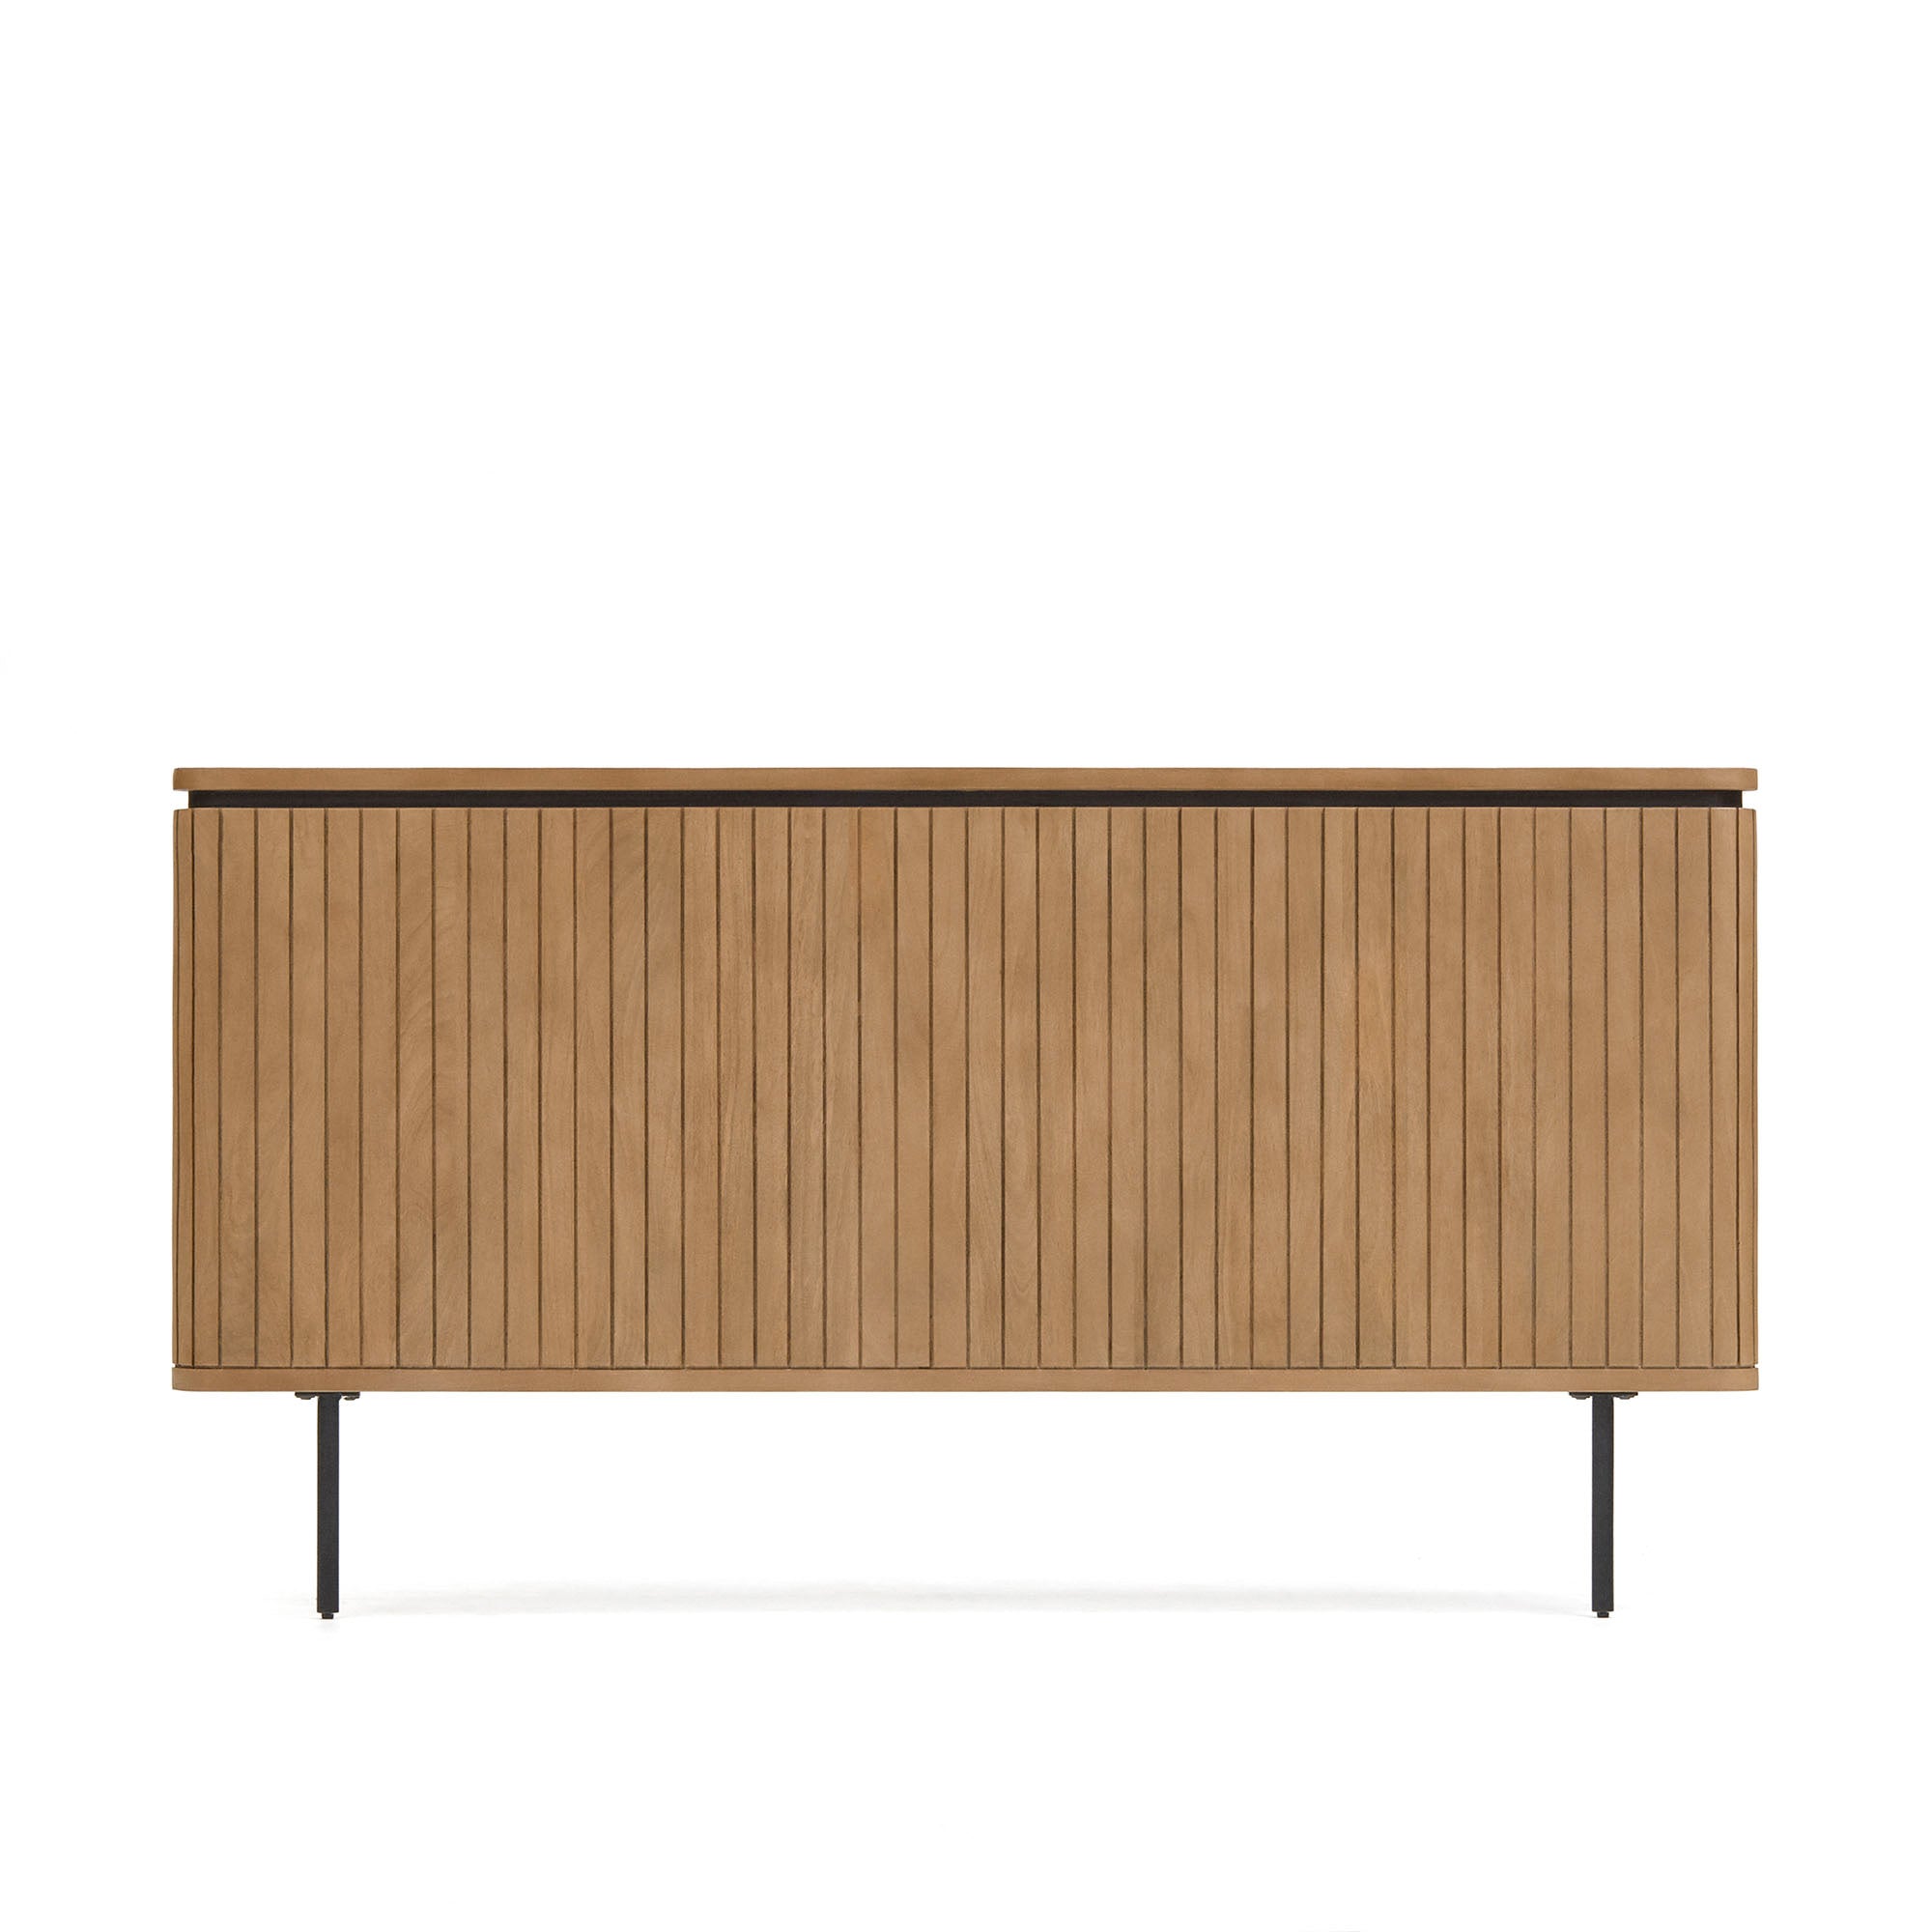 Licia solid mango wood and metal headboard with a black finish, for 180 cm beds